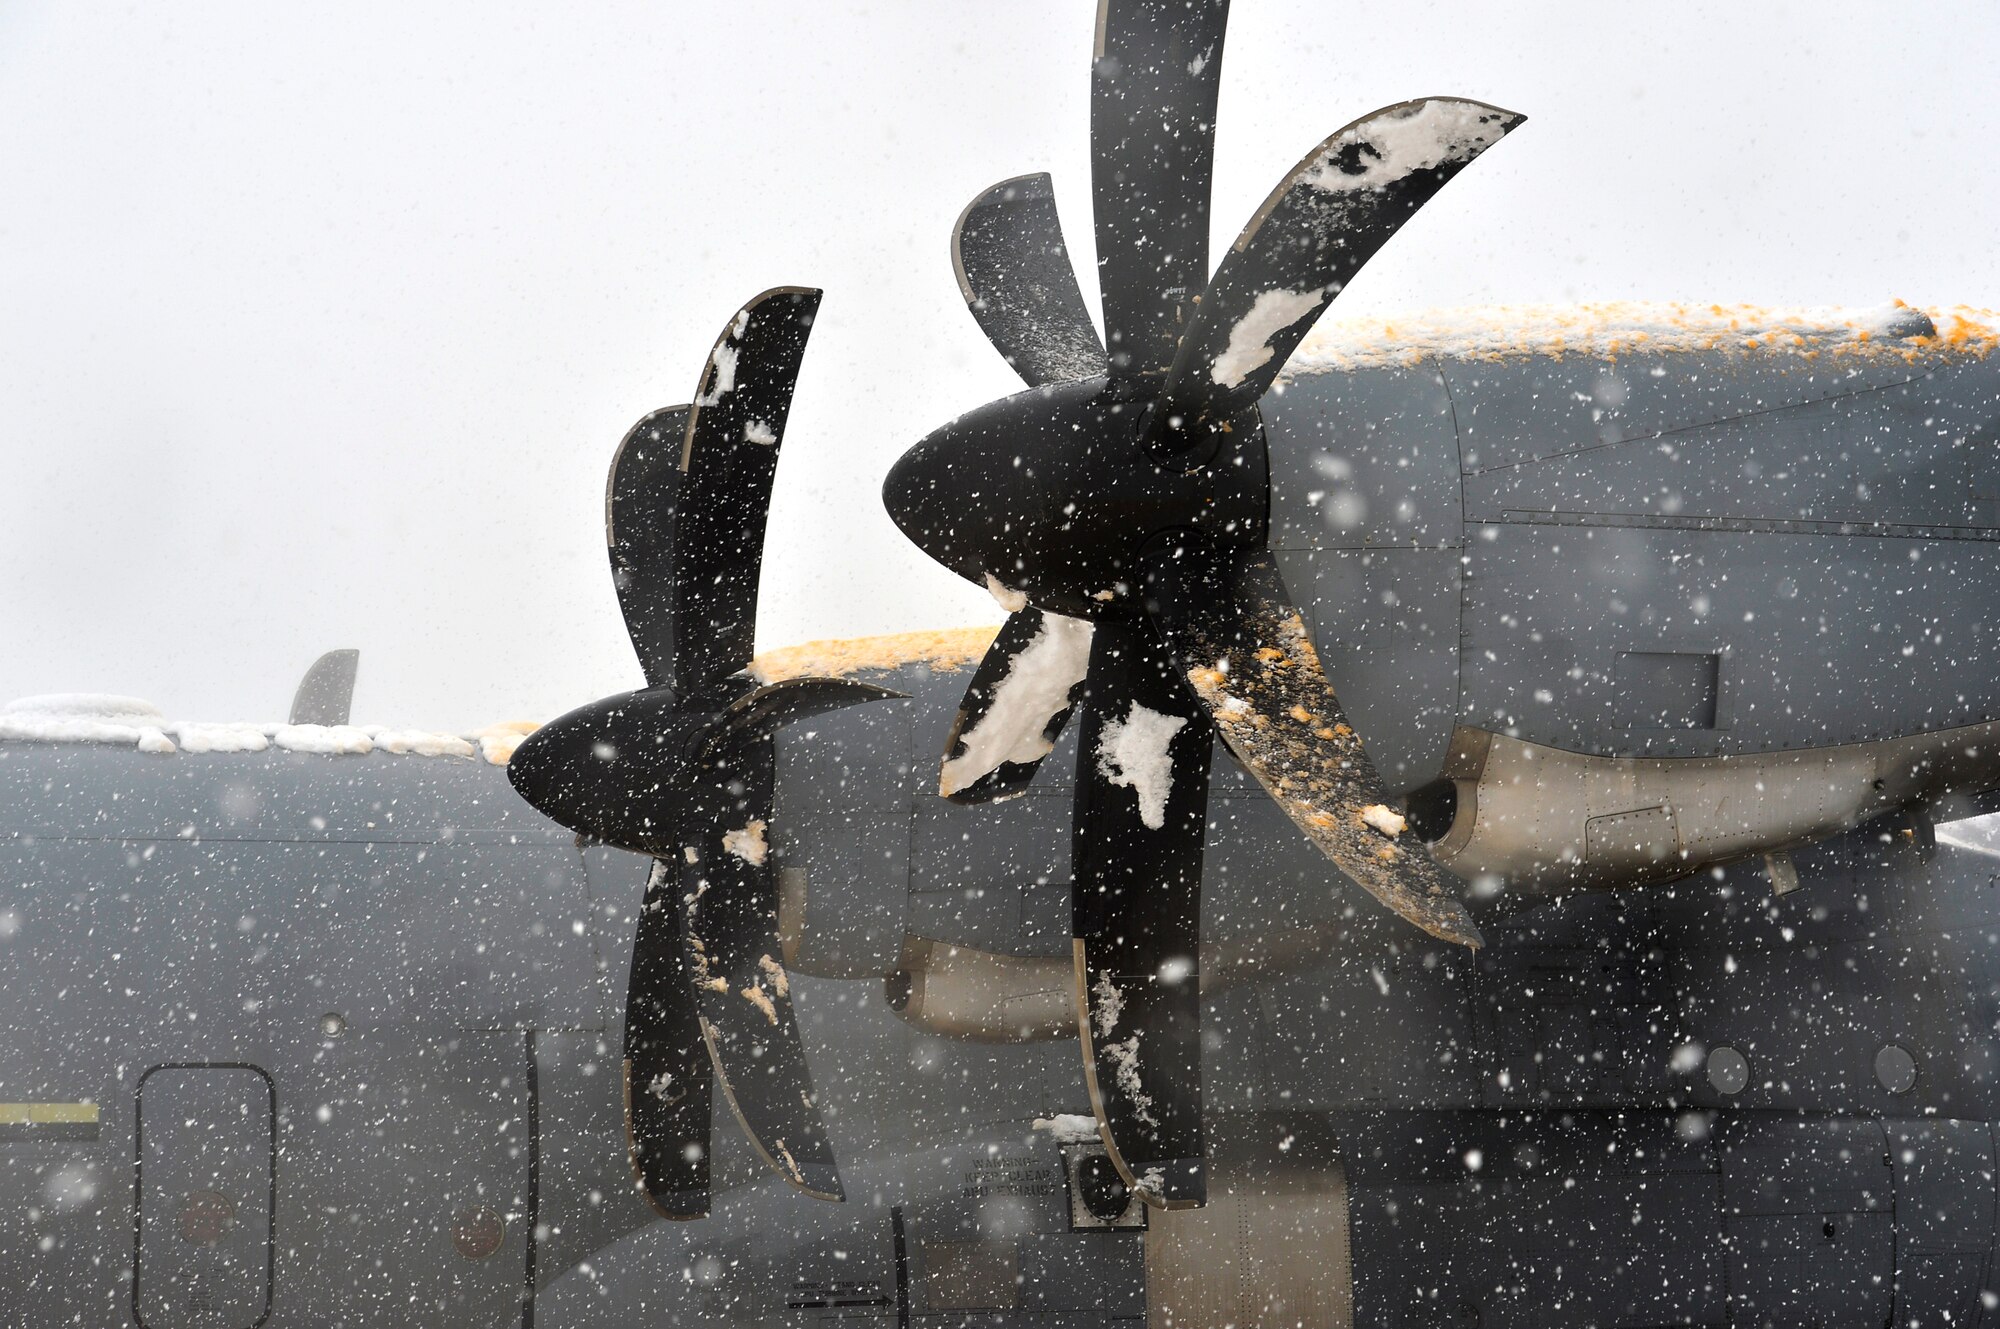 Snow and de-icing fluid stick to the propellers and engines on a C-130J Super Hercules at Ramstein Air Base, Germany, Jan. 10, 2017 The 86th Aircraft Maintenance Squadron conducted de-icing procedures on aircraft after a heavy snowfall on the installation and surrounding areas. The fluid helps prevent build-up of snow for a certain amount of time. (U.S. Air Force photo by Airman 1st Class Joshua Magbanua)